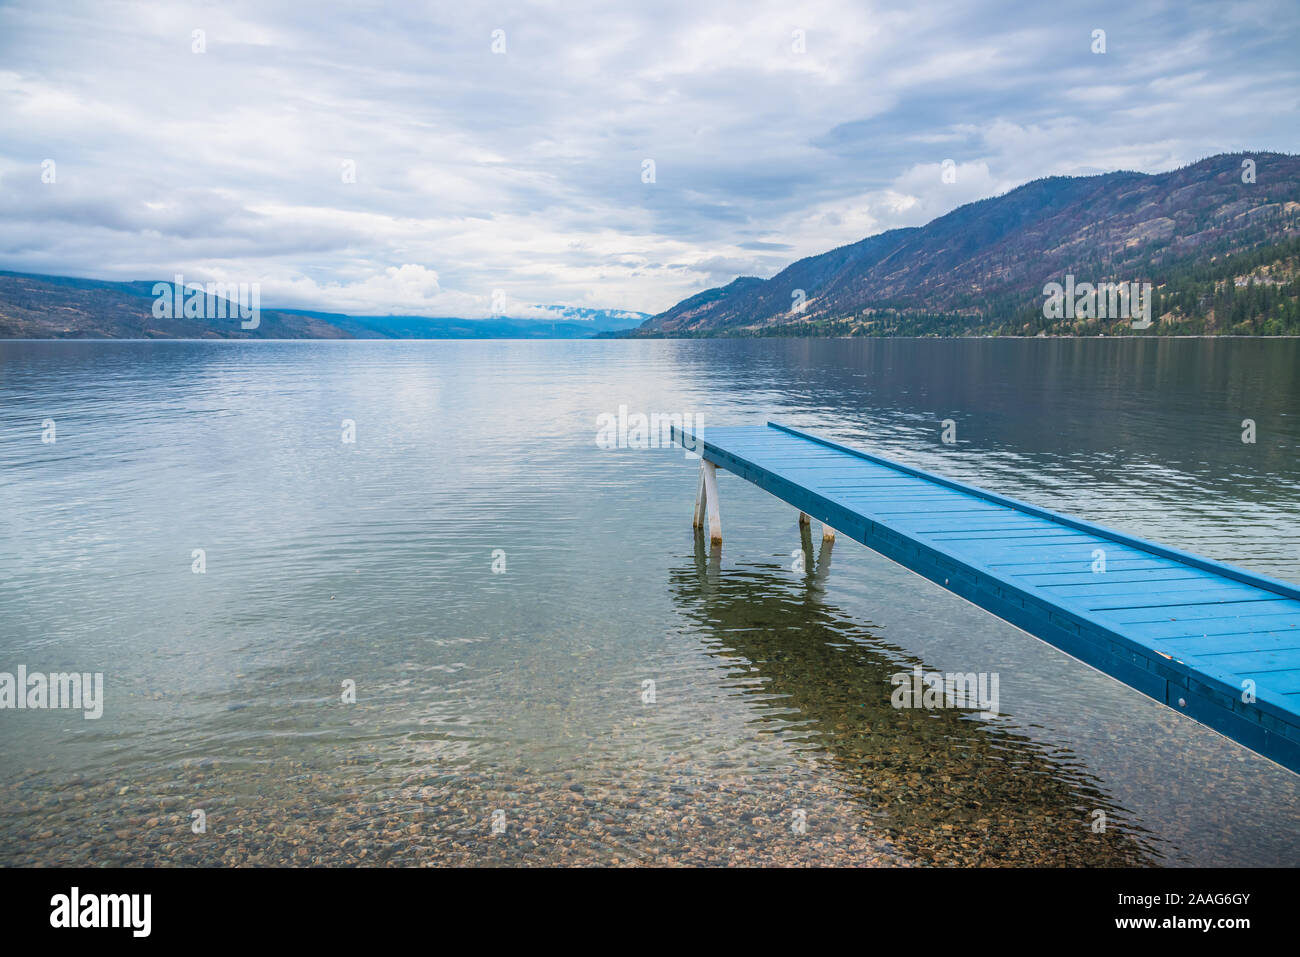 Vibrant blue painted dock extending over water toward view of mountains and overcast sky at Okanagan Lake Stock Photo